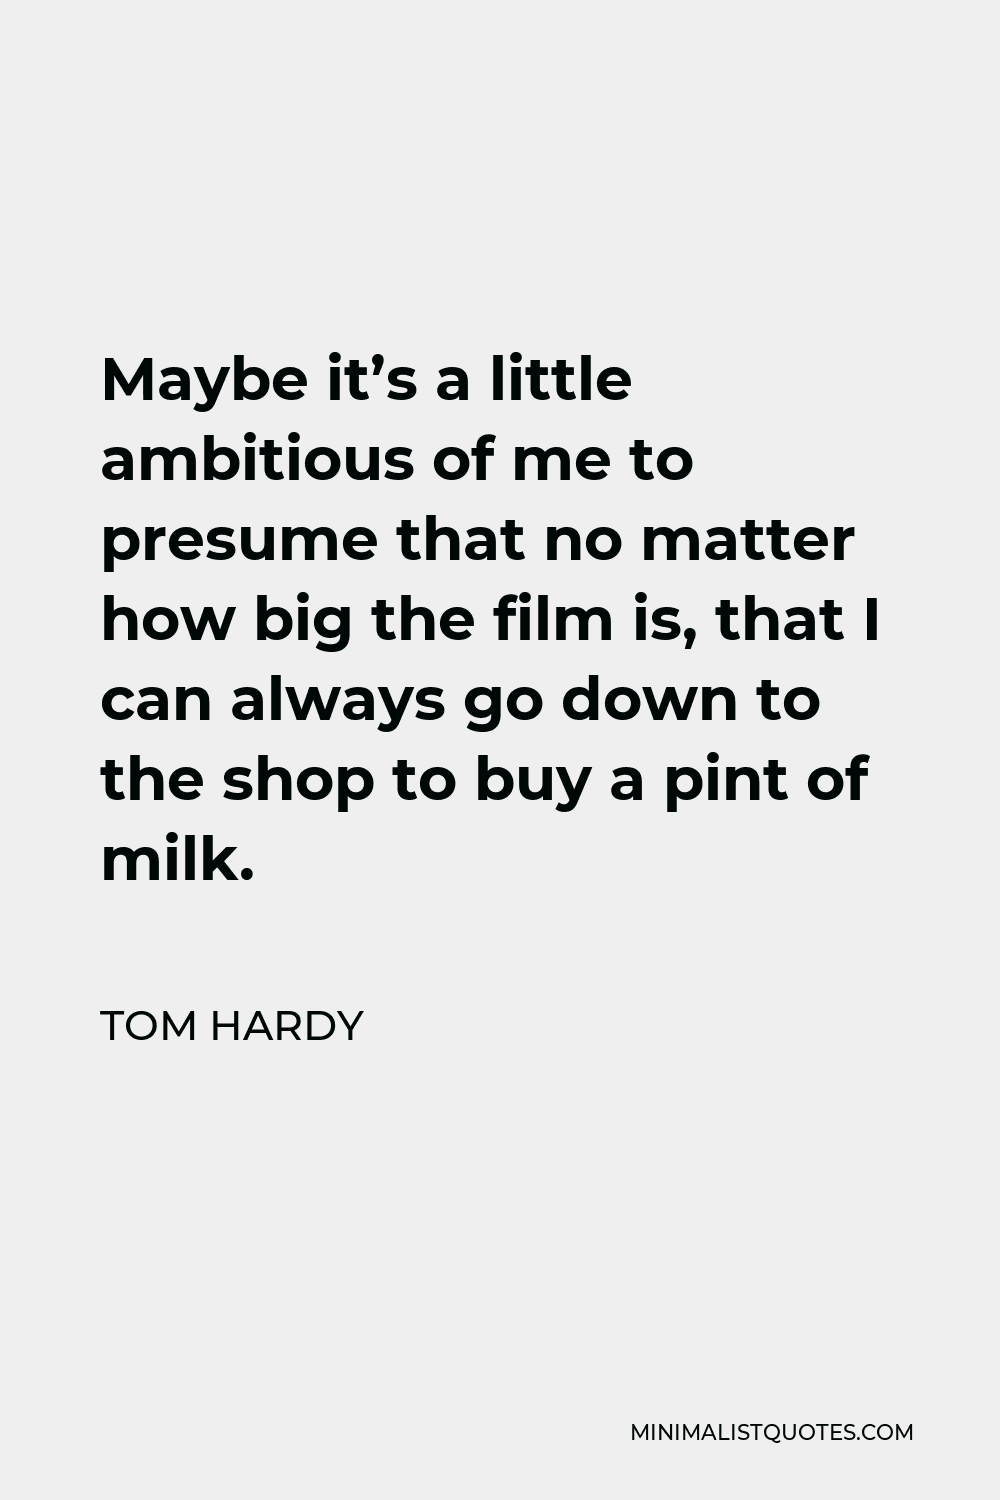 Tom Hardy Quote - Maybe it’s a little ambitious of me to presume that no matter how big the film is, that I can always go down to the shop to buy a pint of milk.